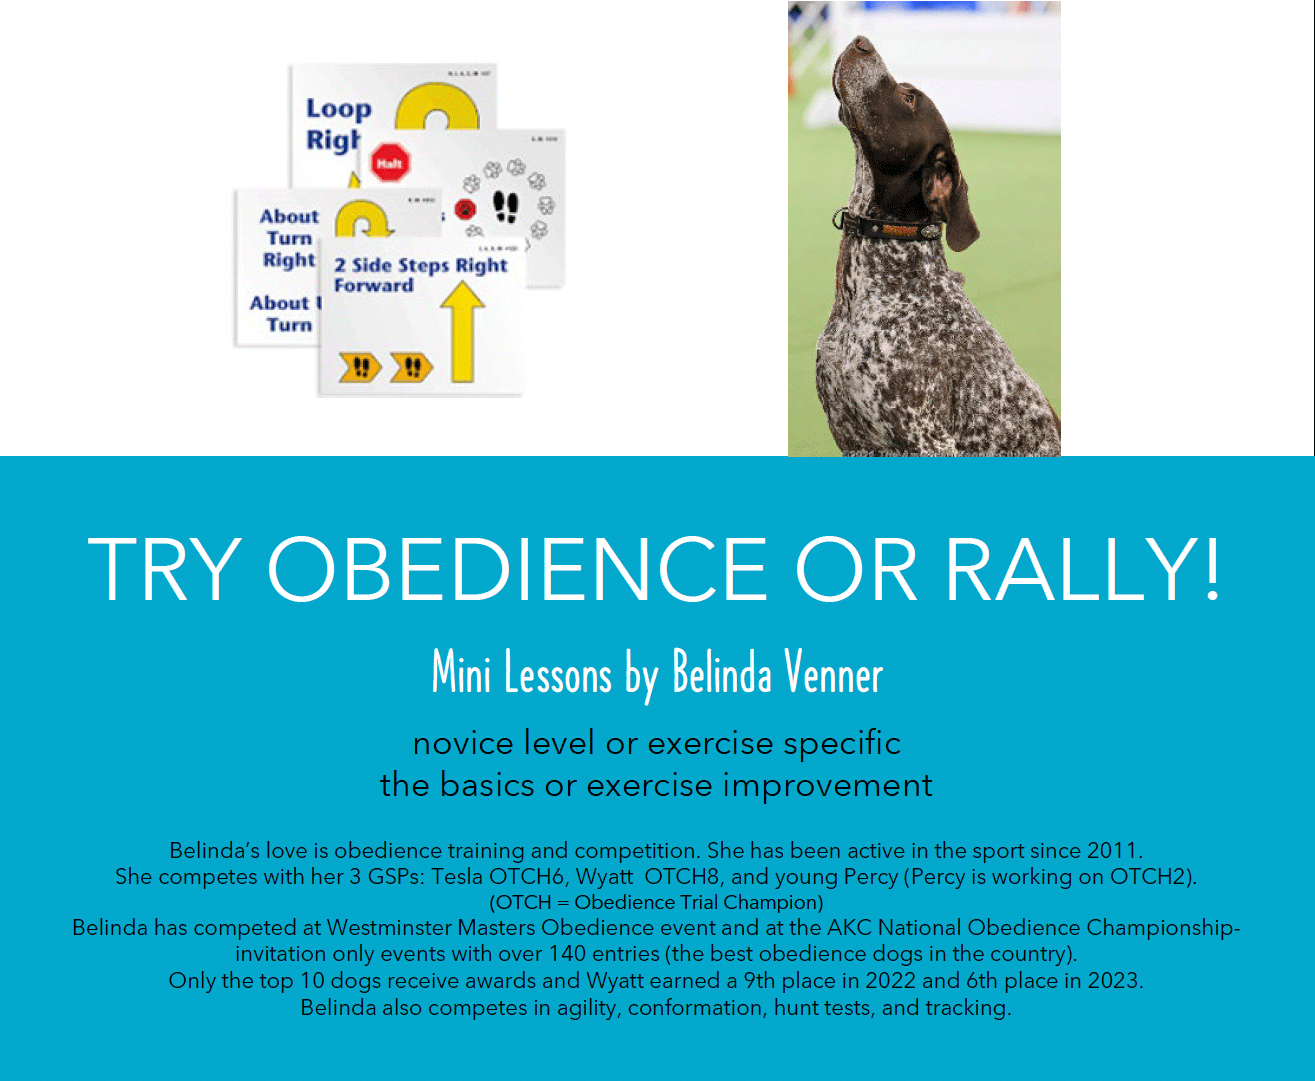 Sign Up For Mini Lessons - Obedience and Rally